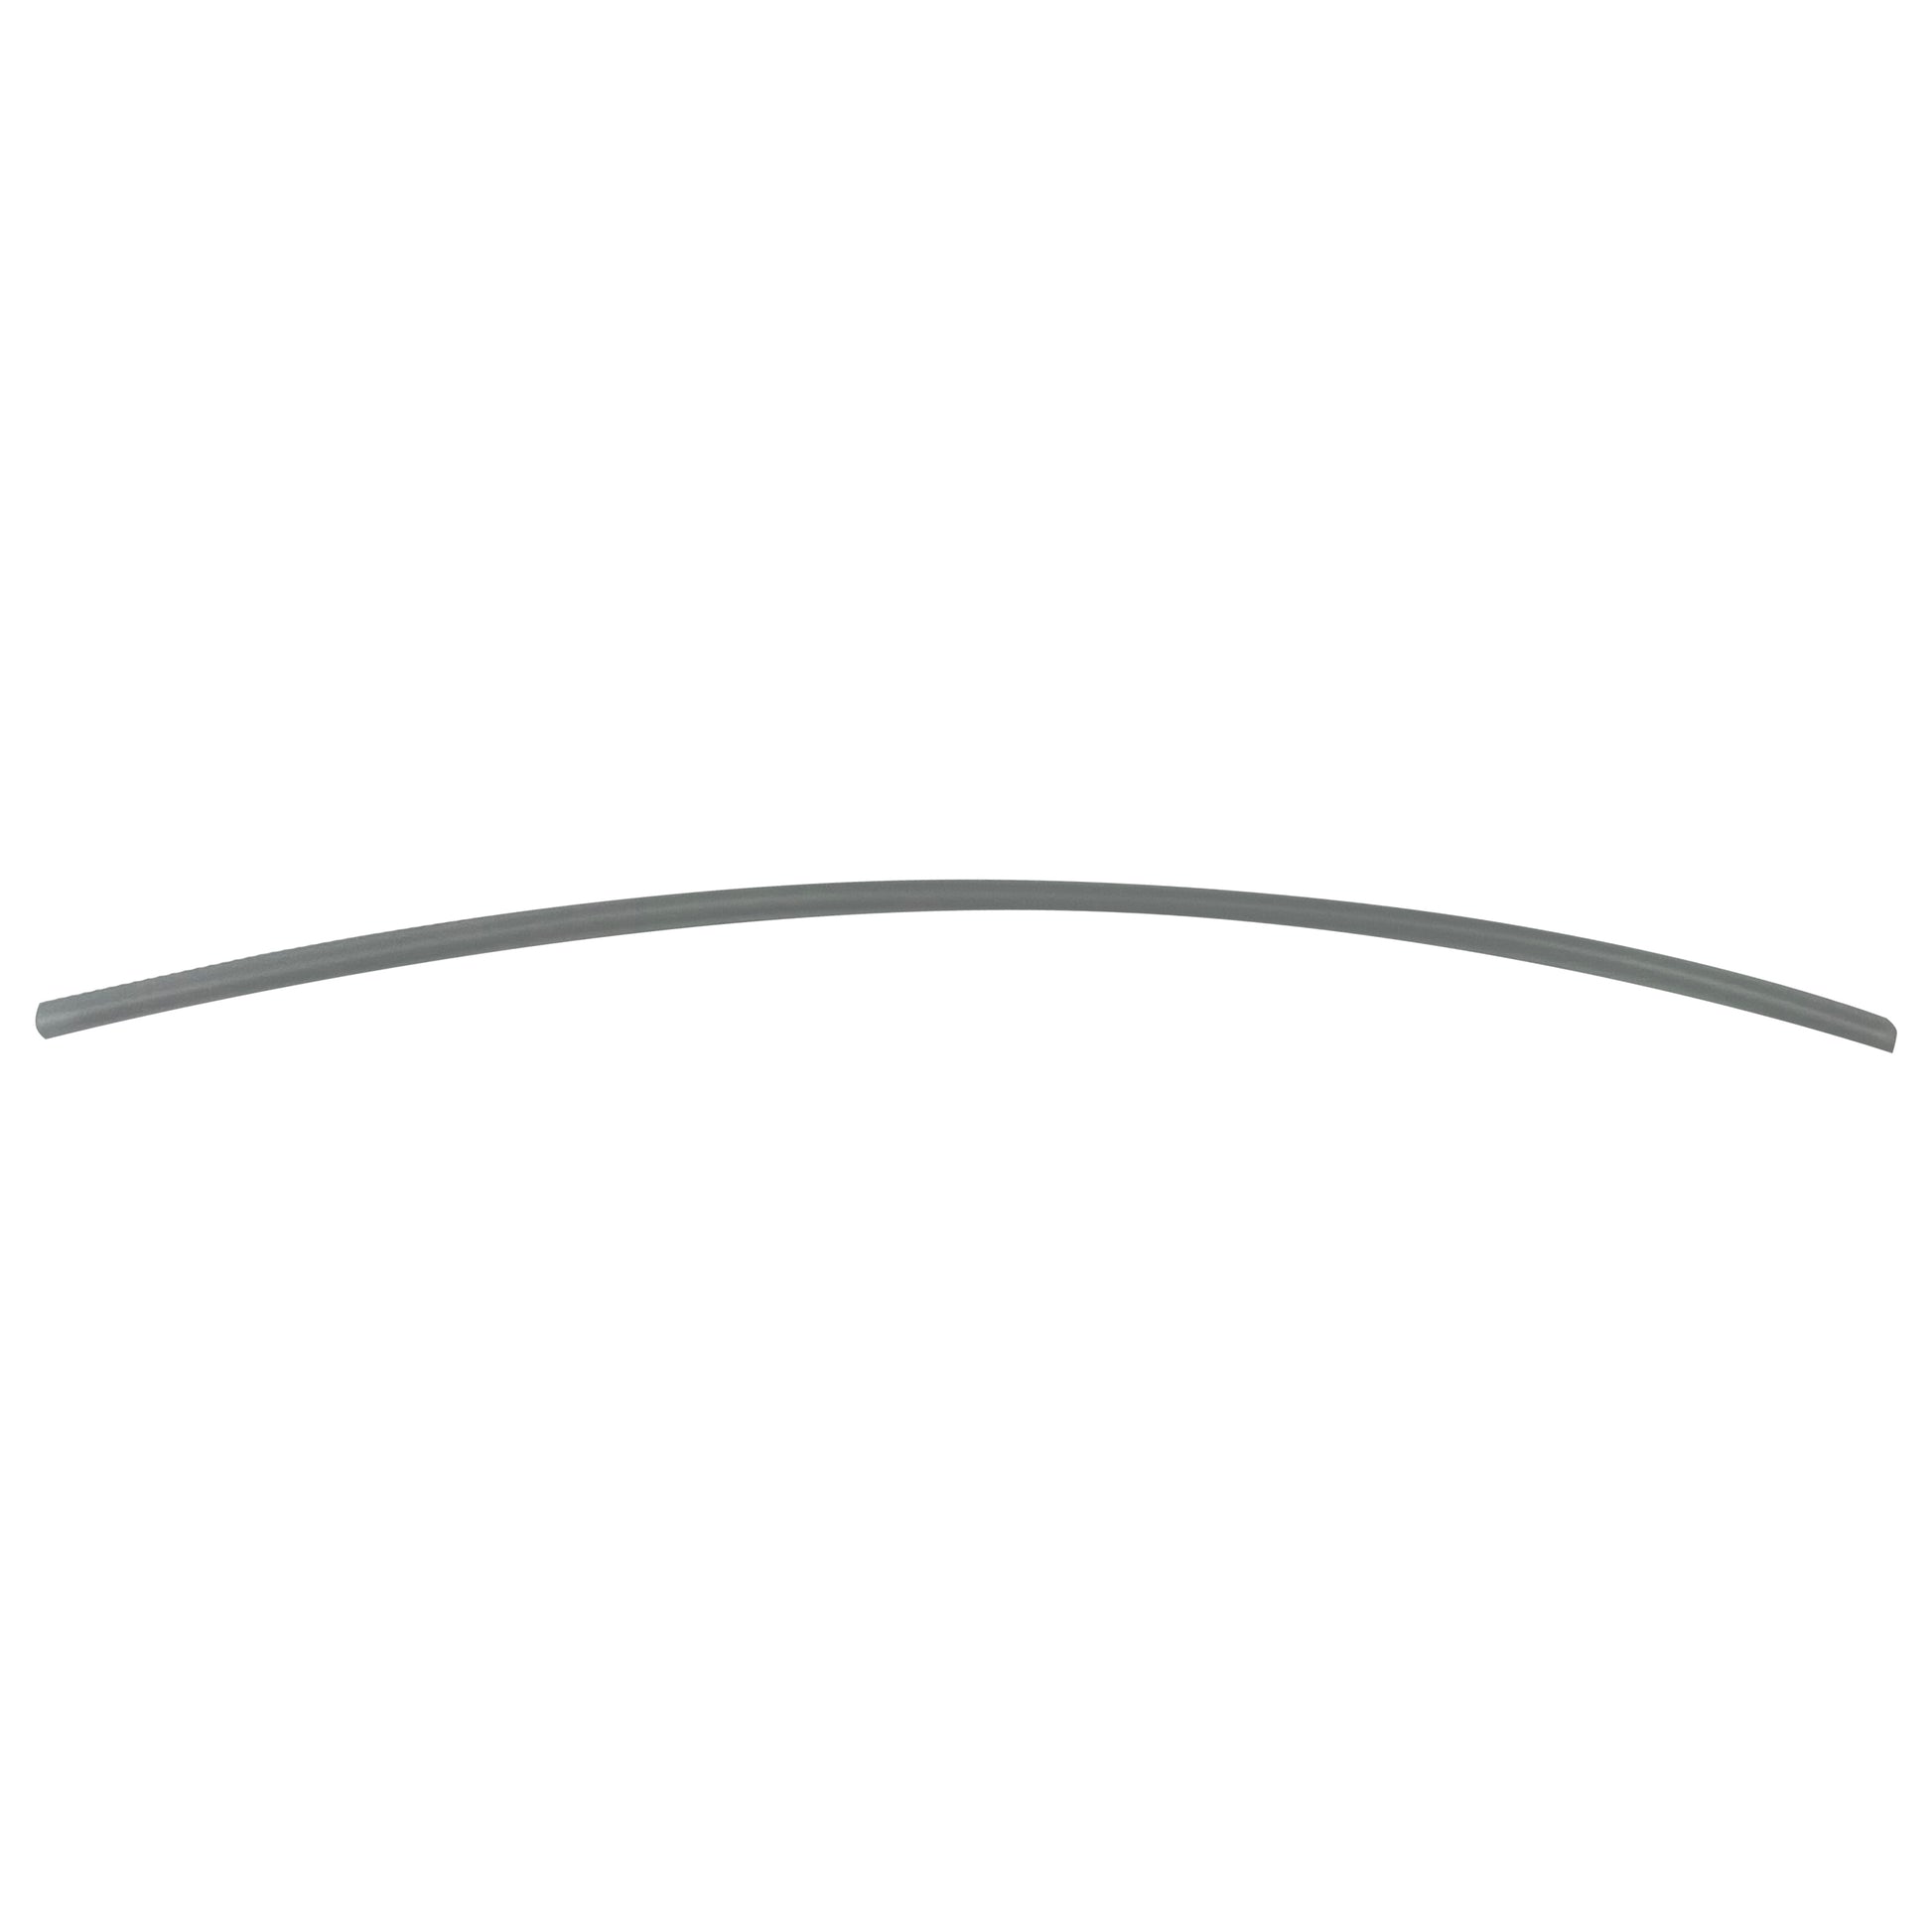 Flexible Thin Single Wall Non-Adhesive Heat Shrink Tubing 2:1 Clear 3/32" ID - 12" Inch 10 Pack